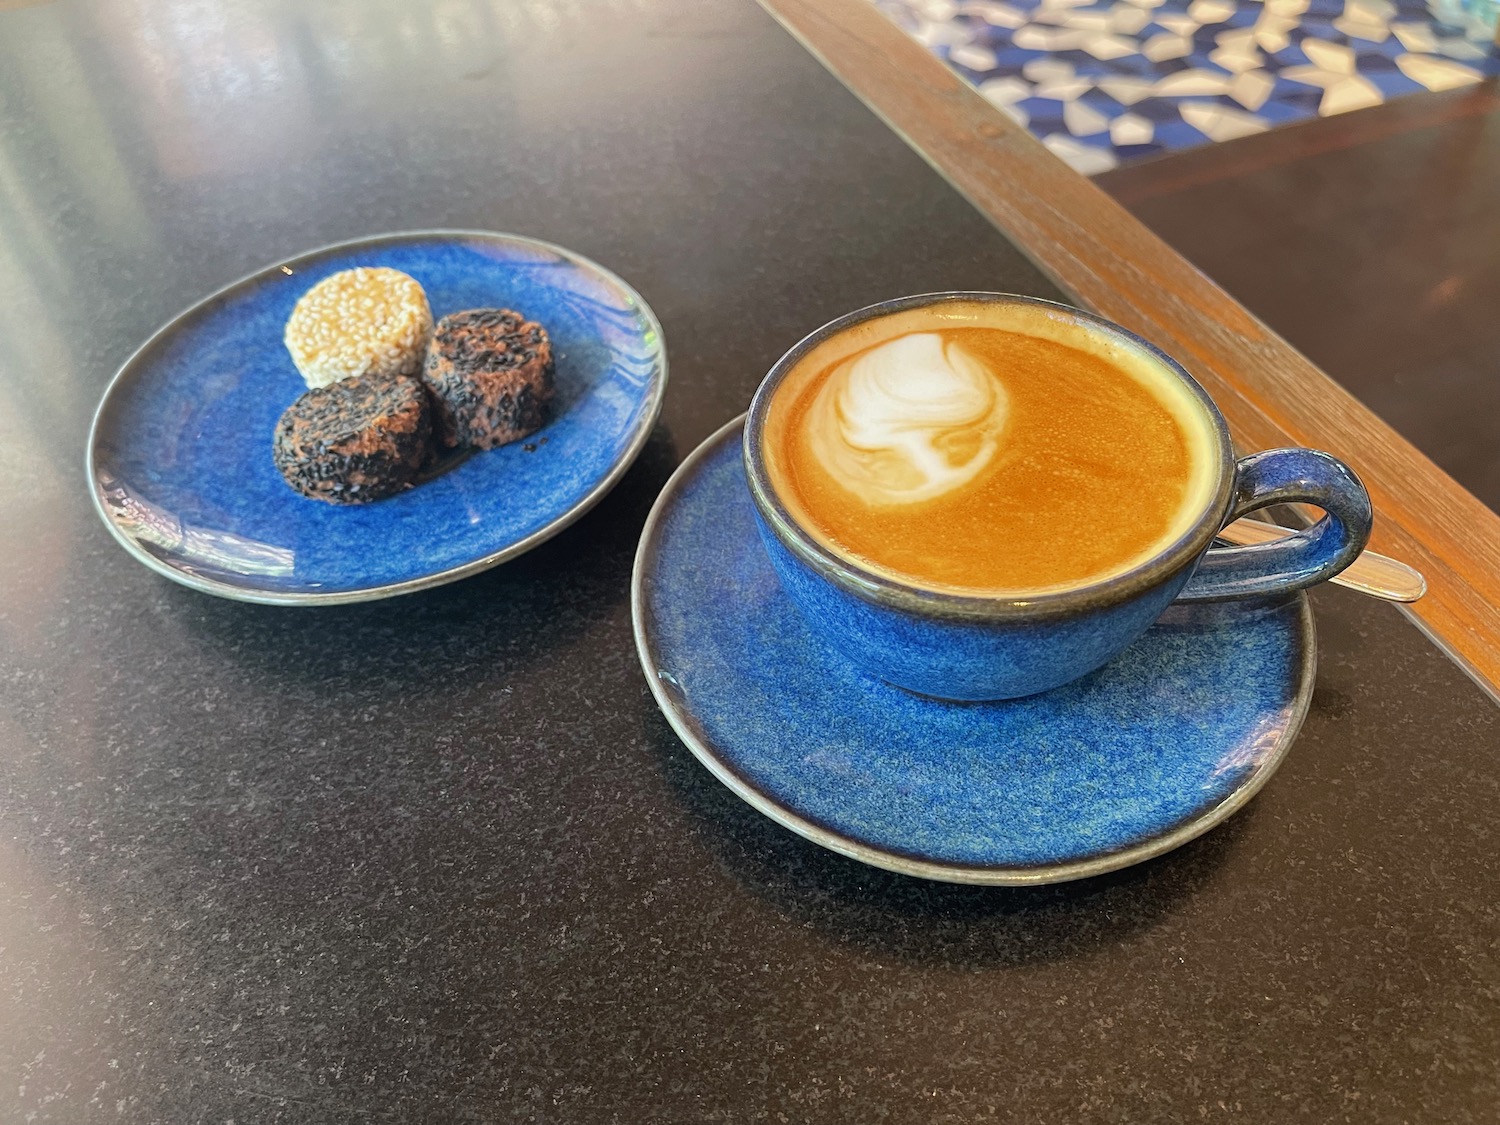 a blue cup of coffee and a plate of food